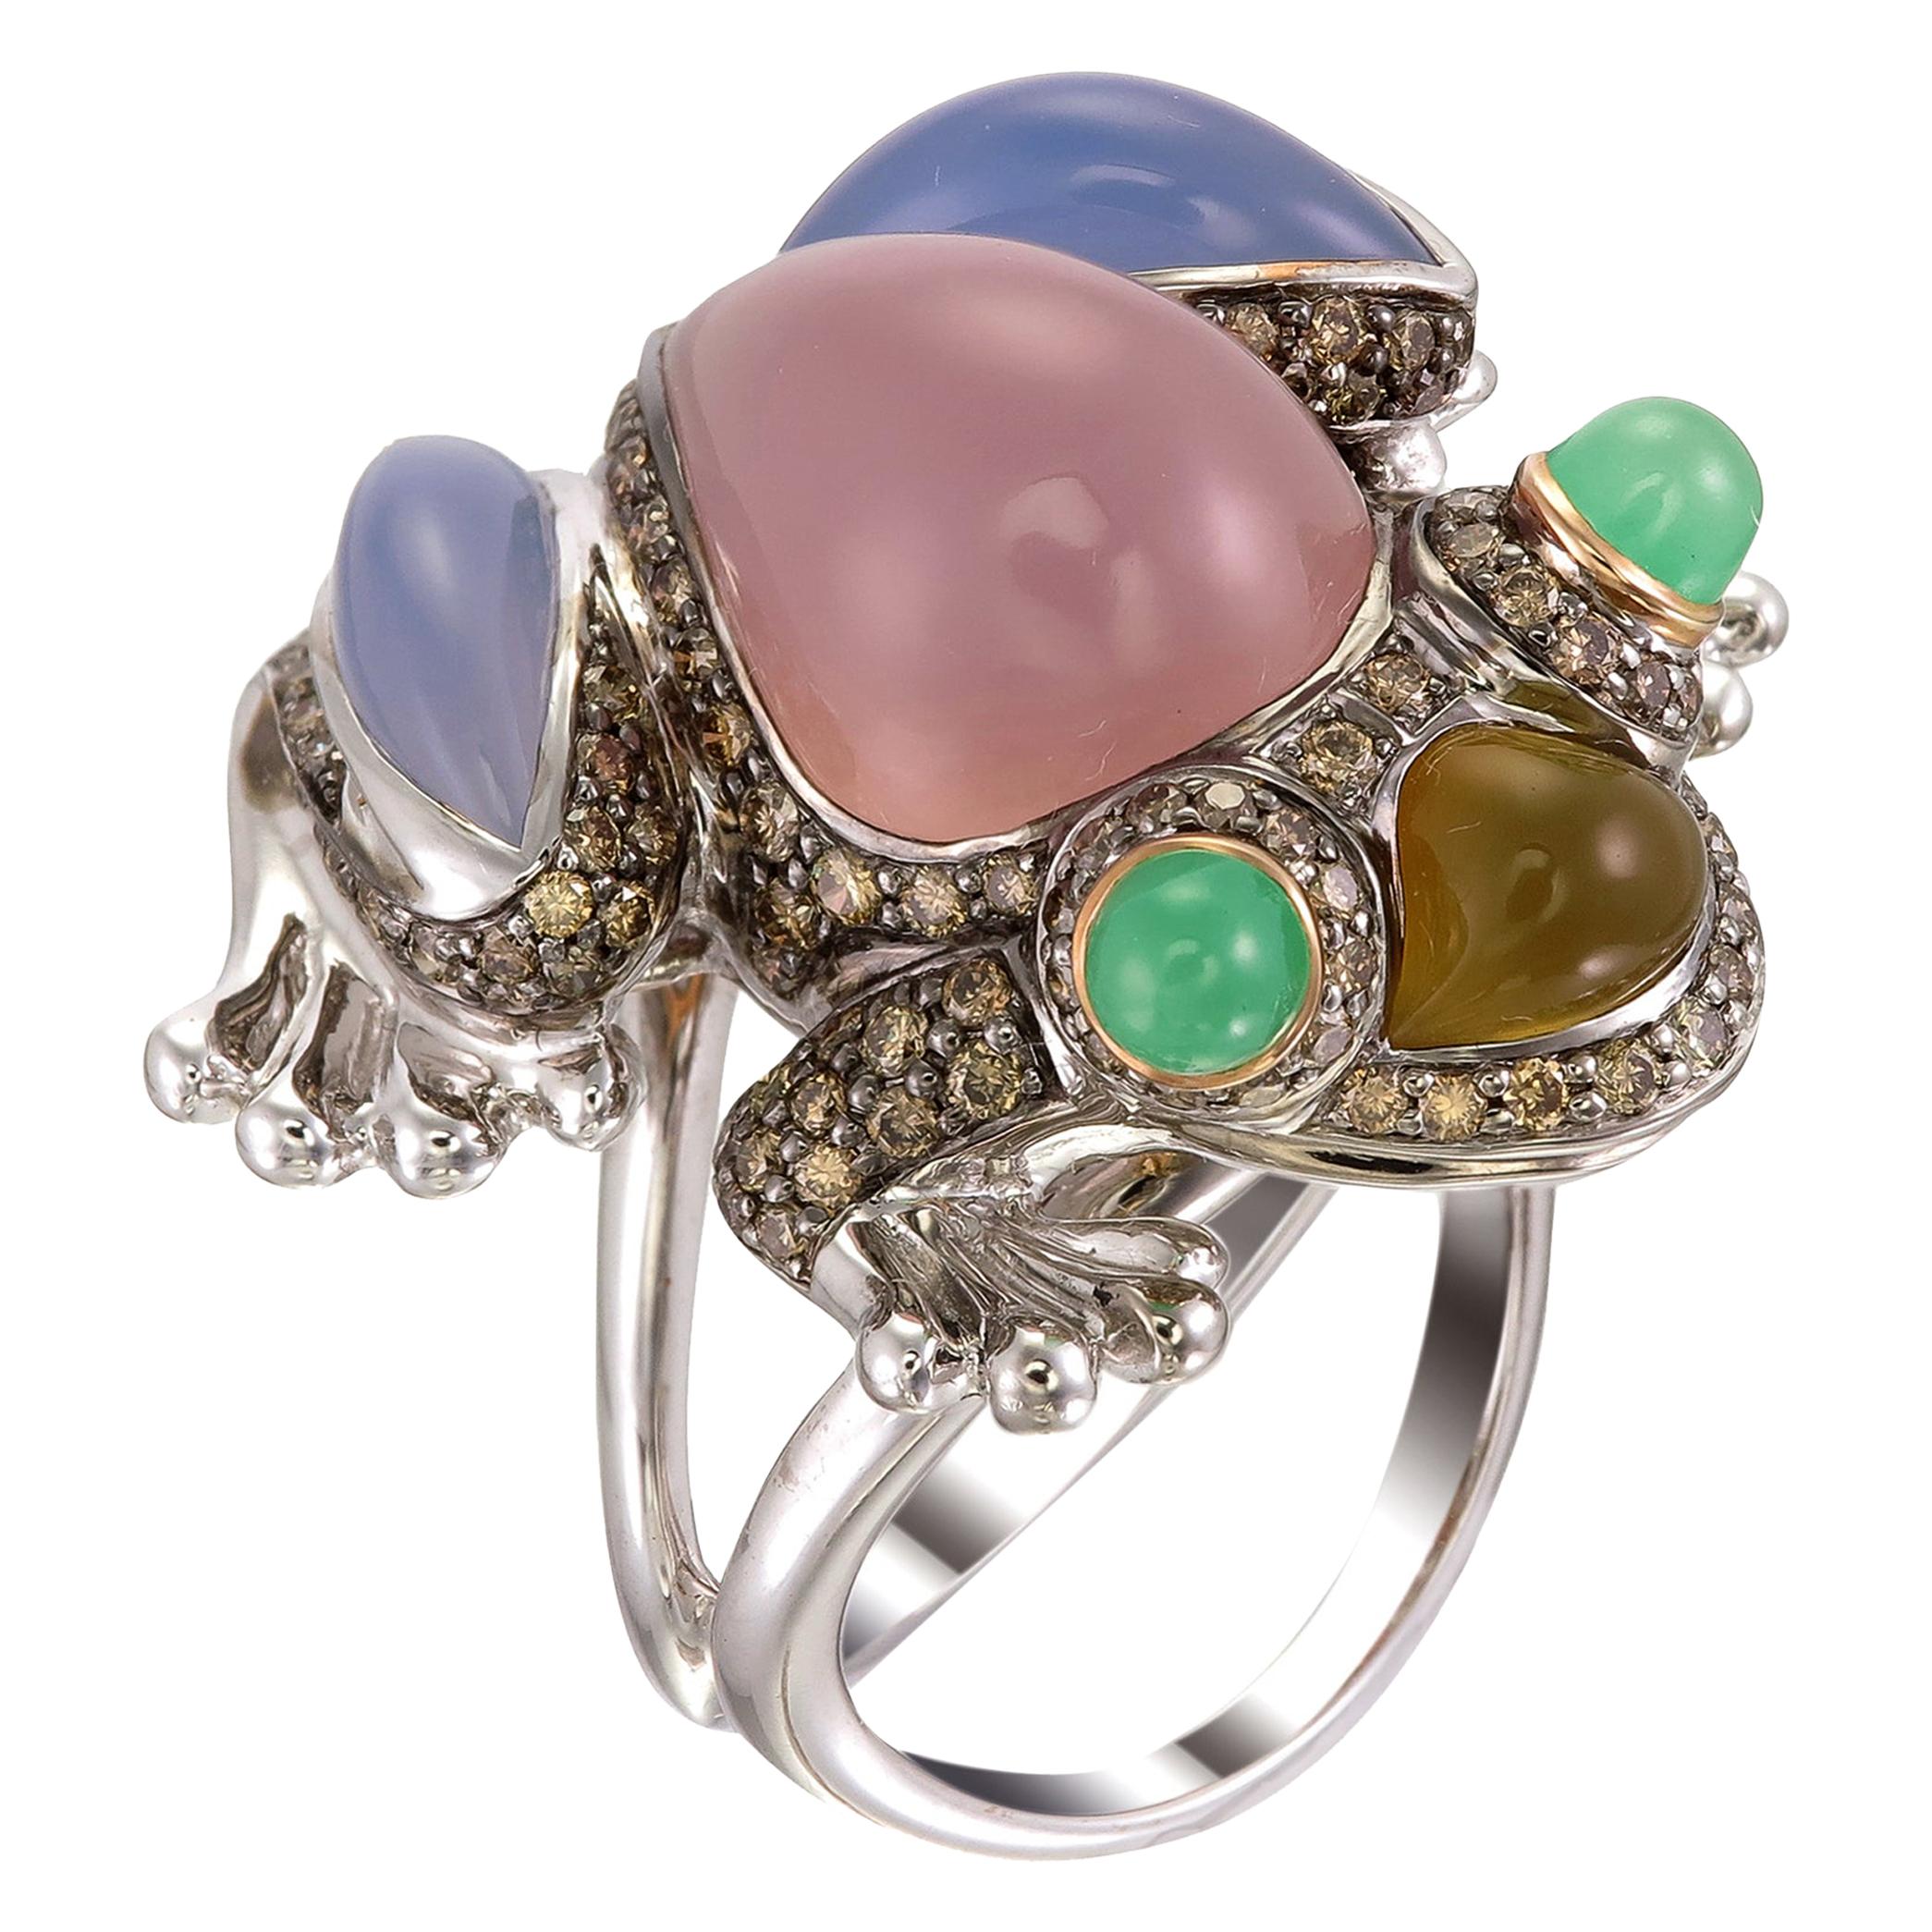 Zorab Creation Multicolored Chalcedony Hoppy the Frog Ring For Sale